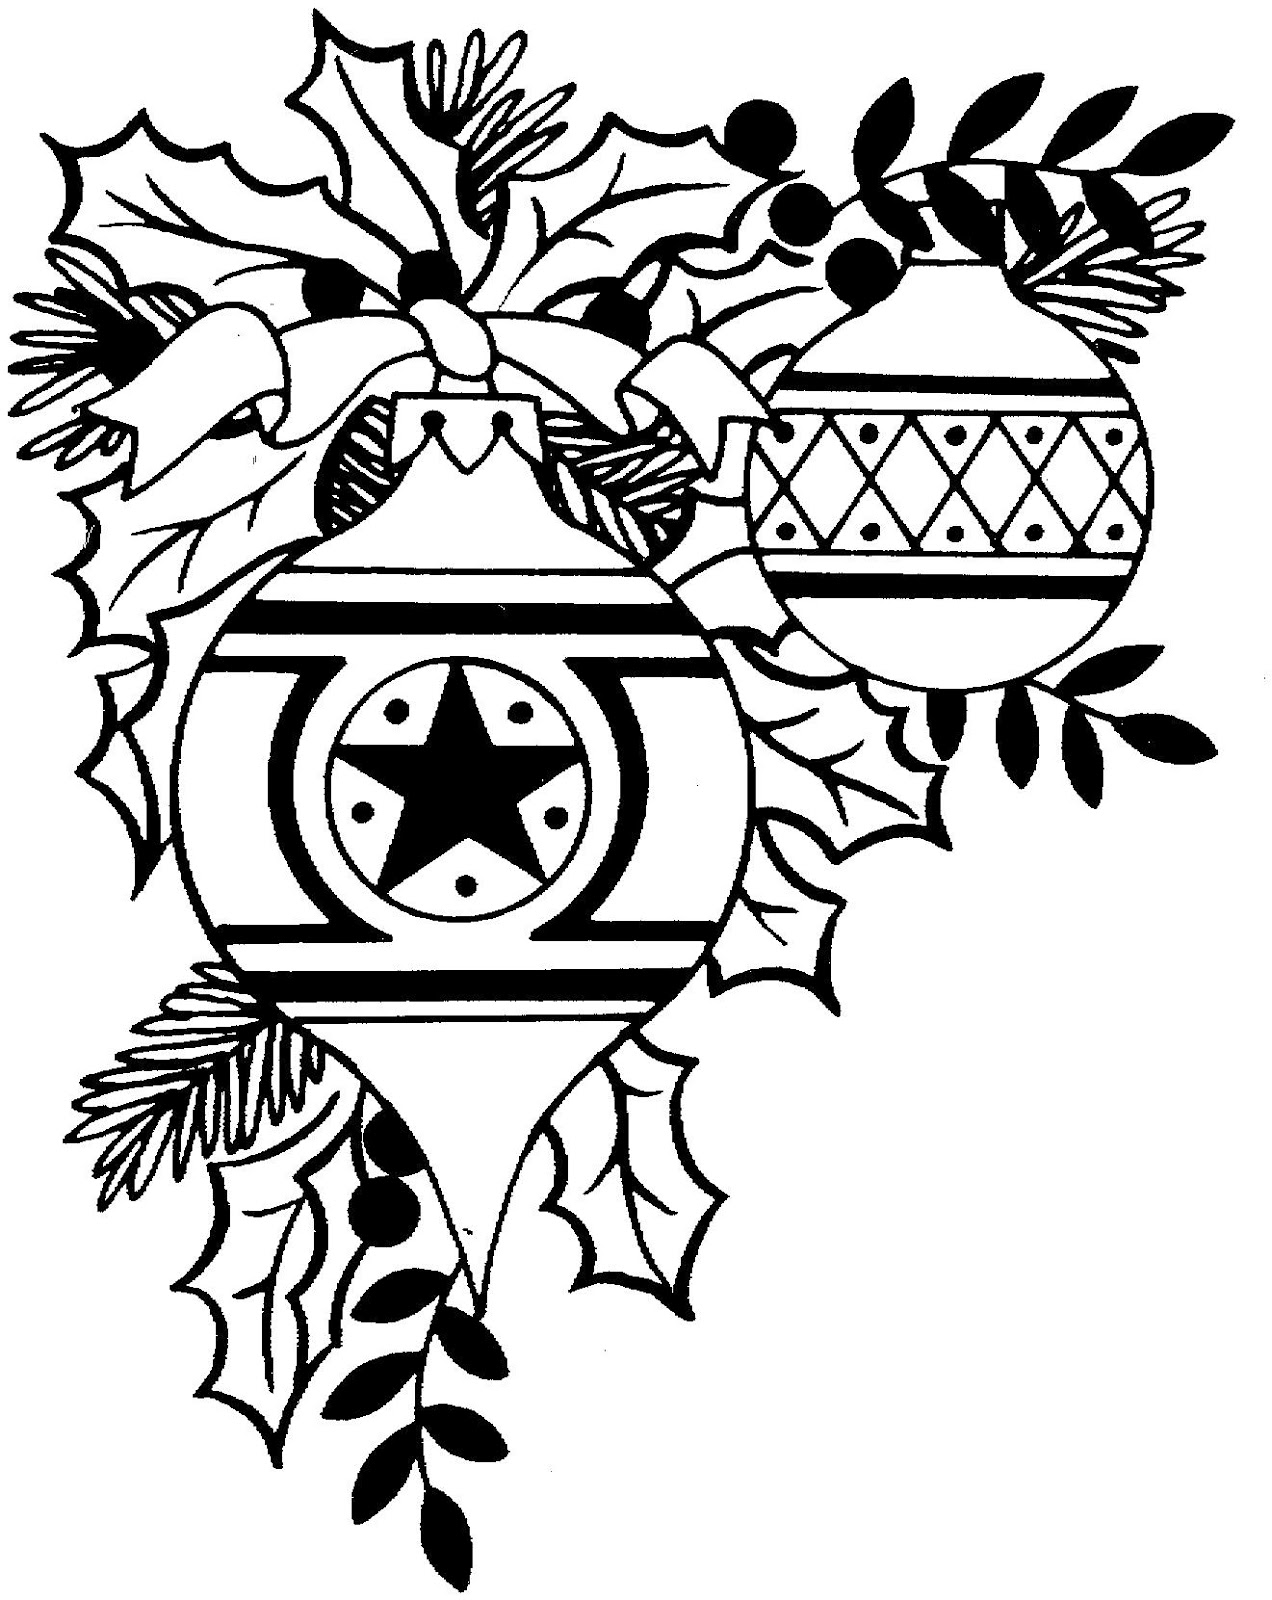 black and white christmas clipart borders